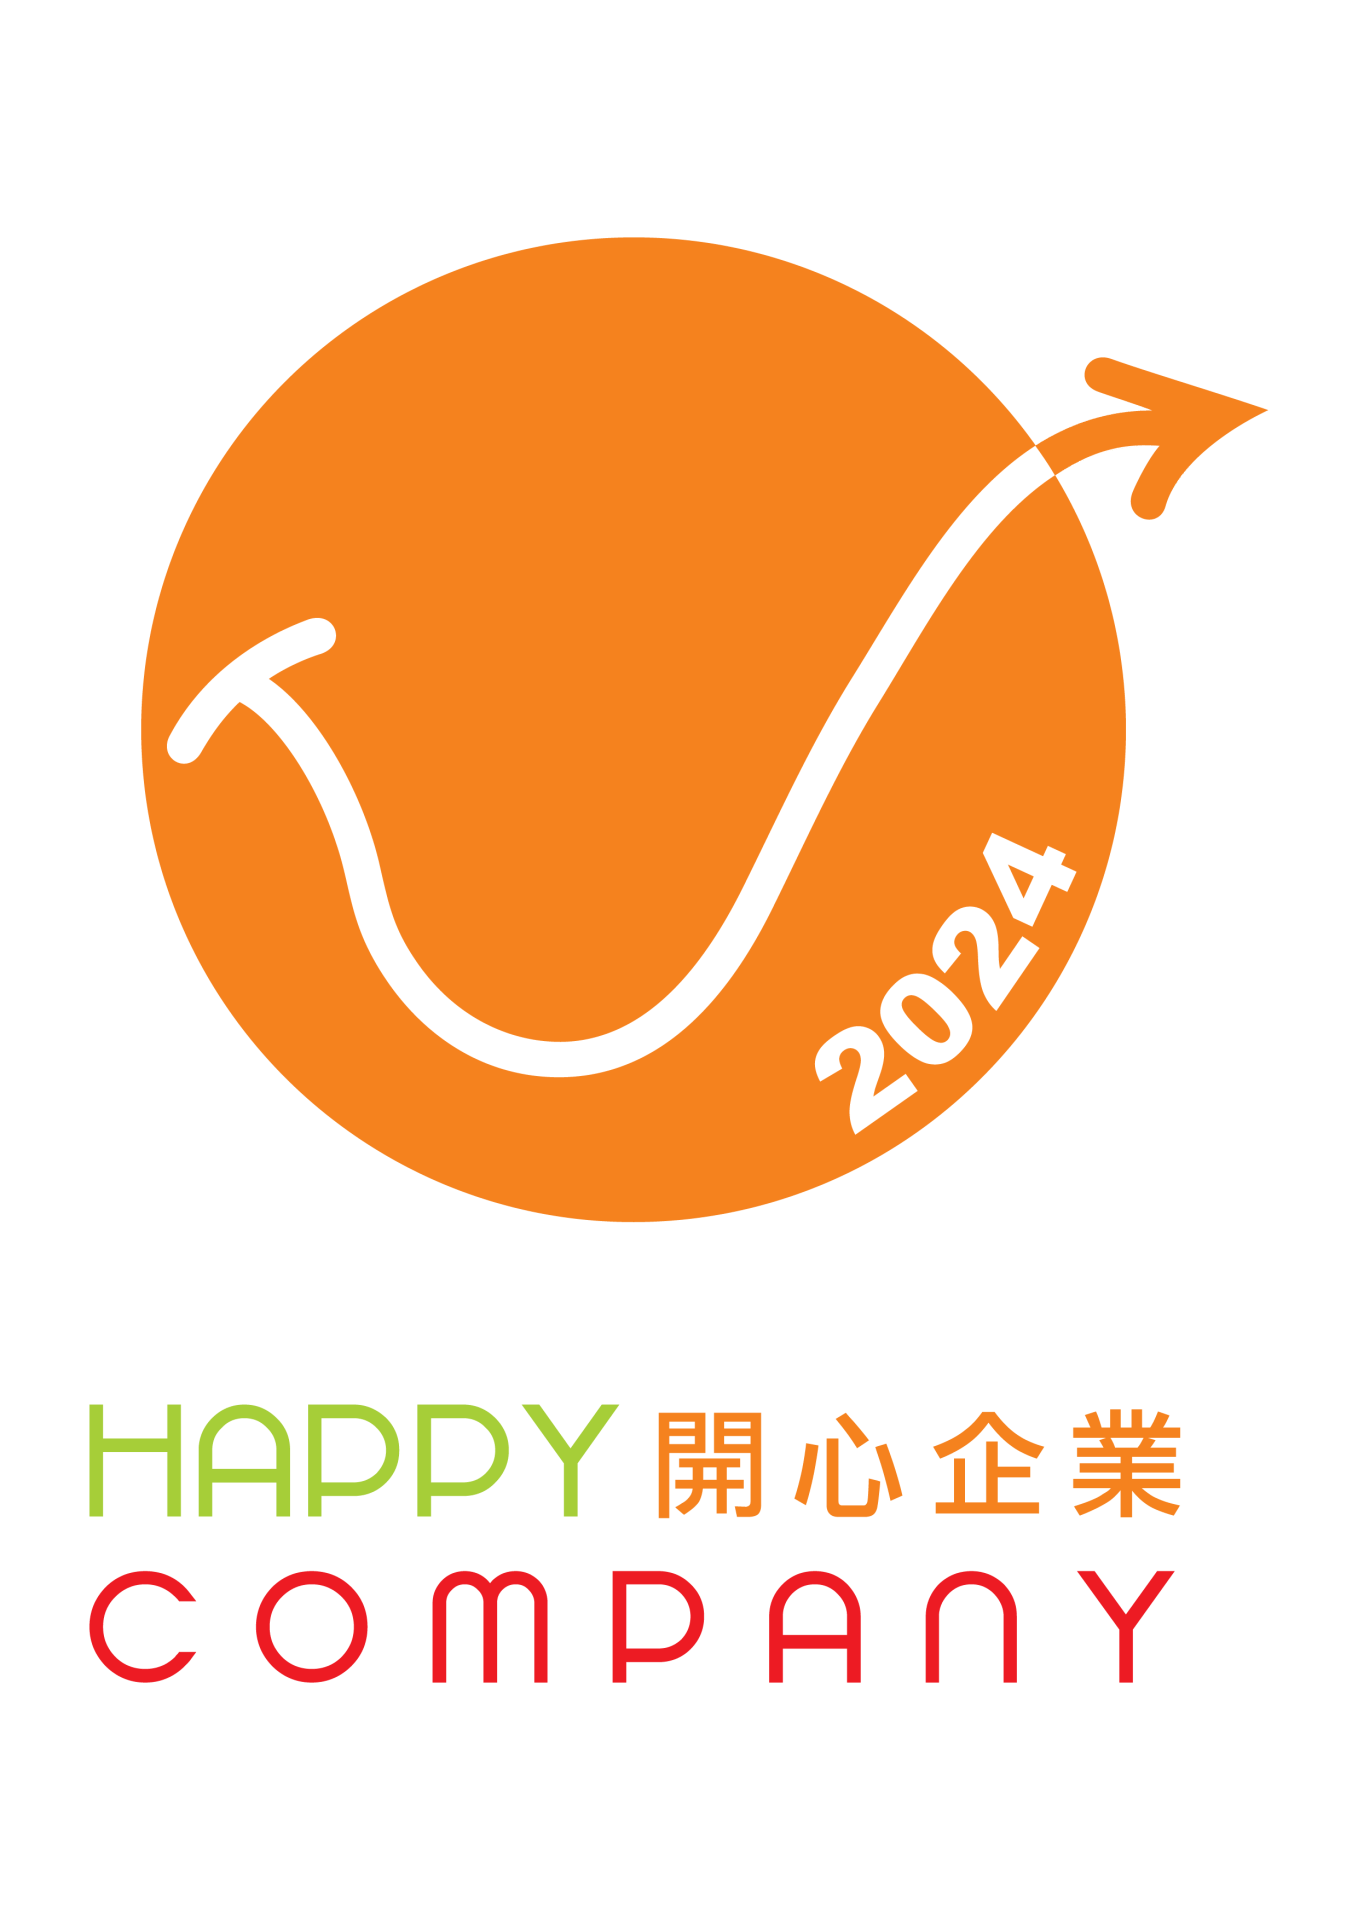 The Chinese Manufacturers’ Association of HK - Happy Company